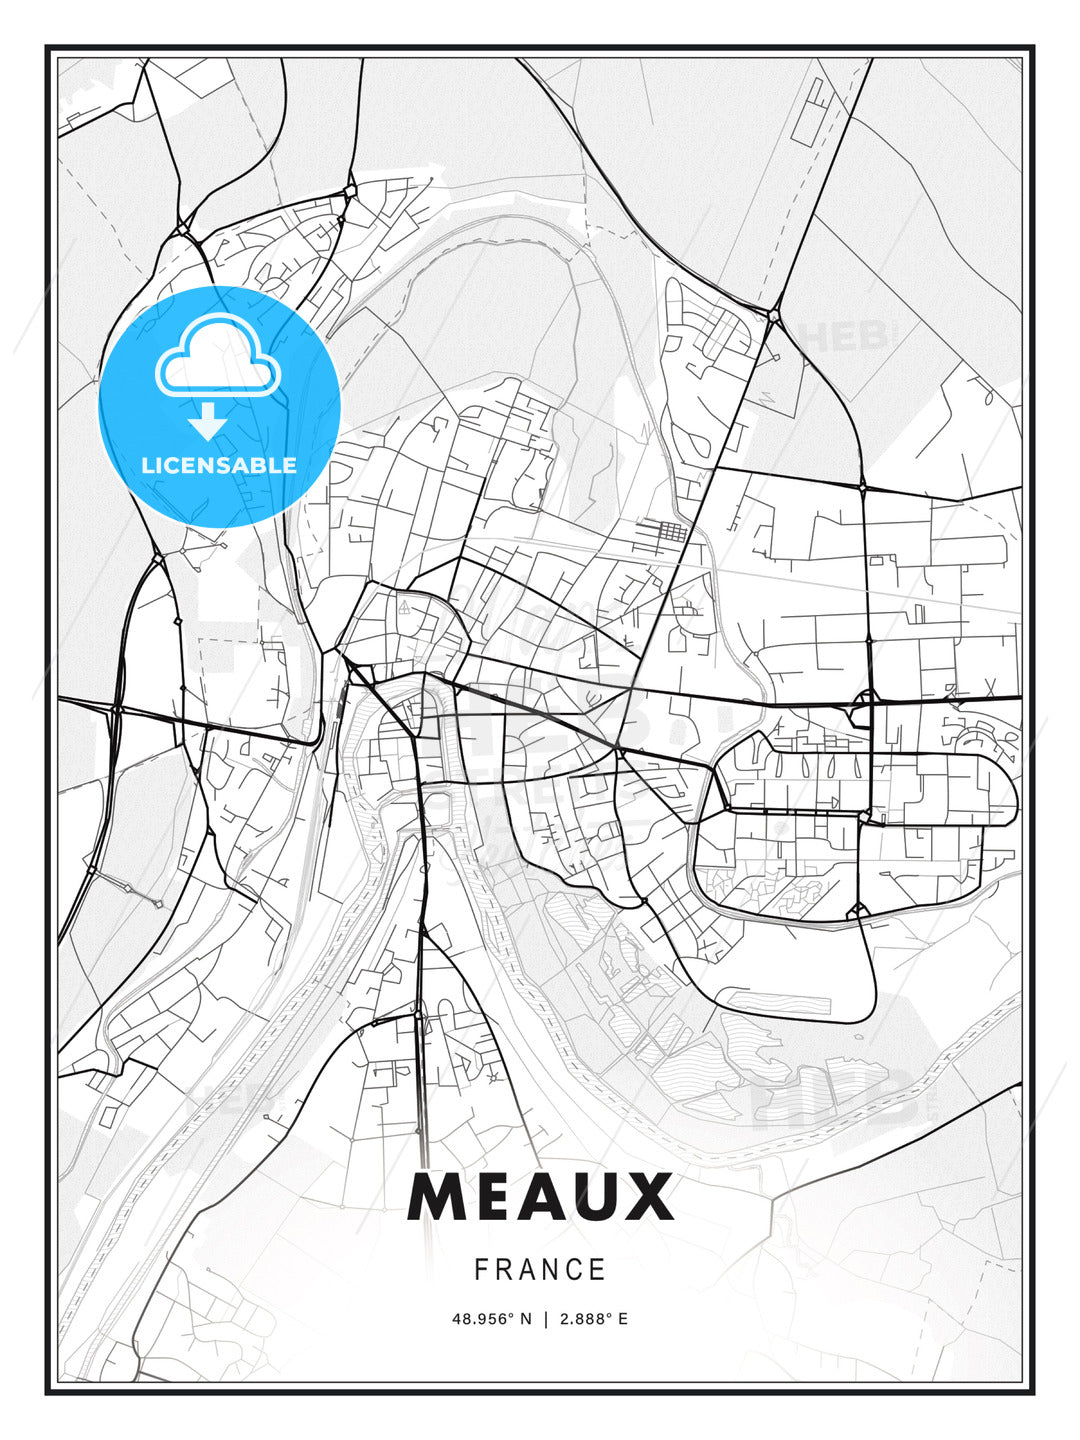 Meaux, France, Modern Print Template in Various Formats - HEBSTREITS Sketches